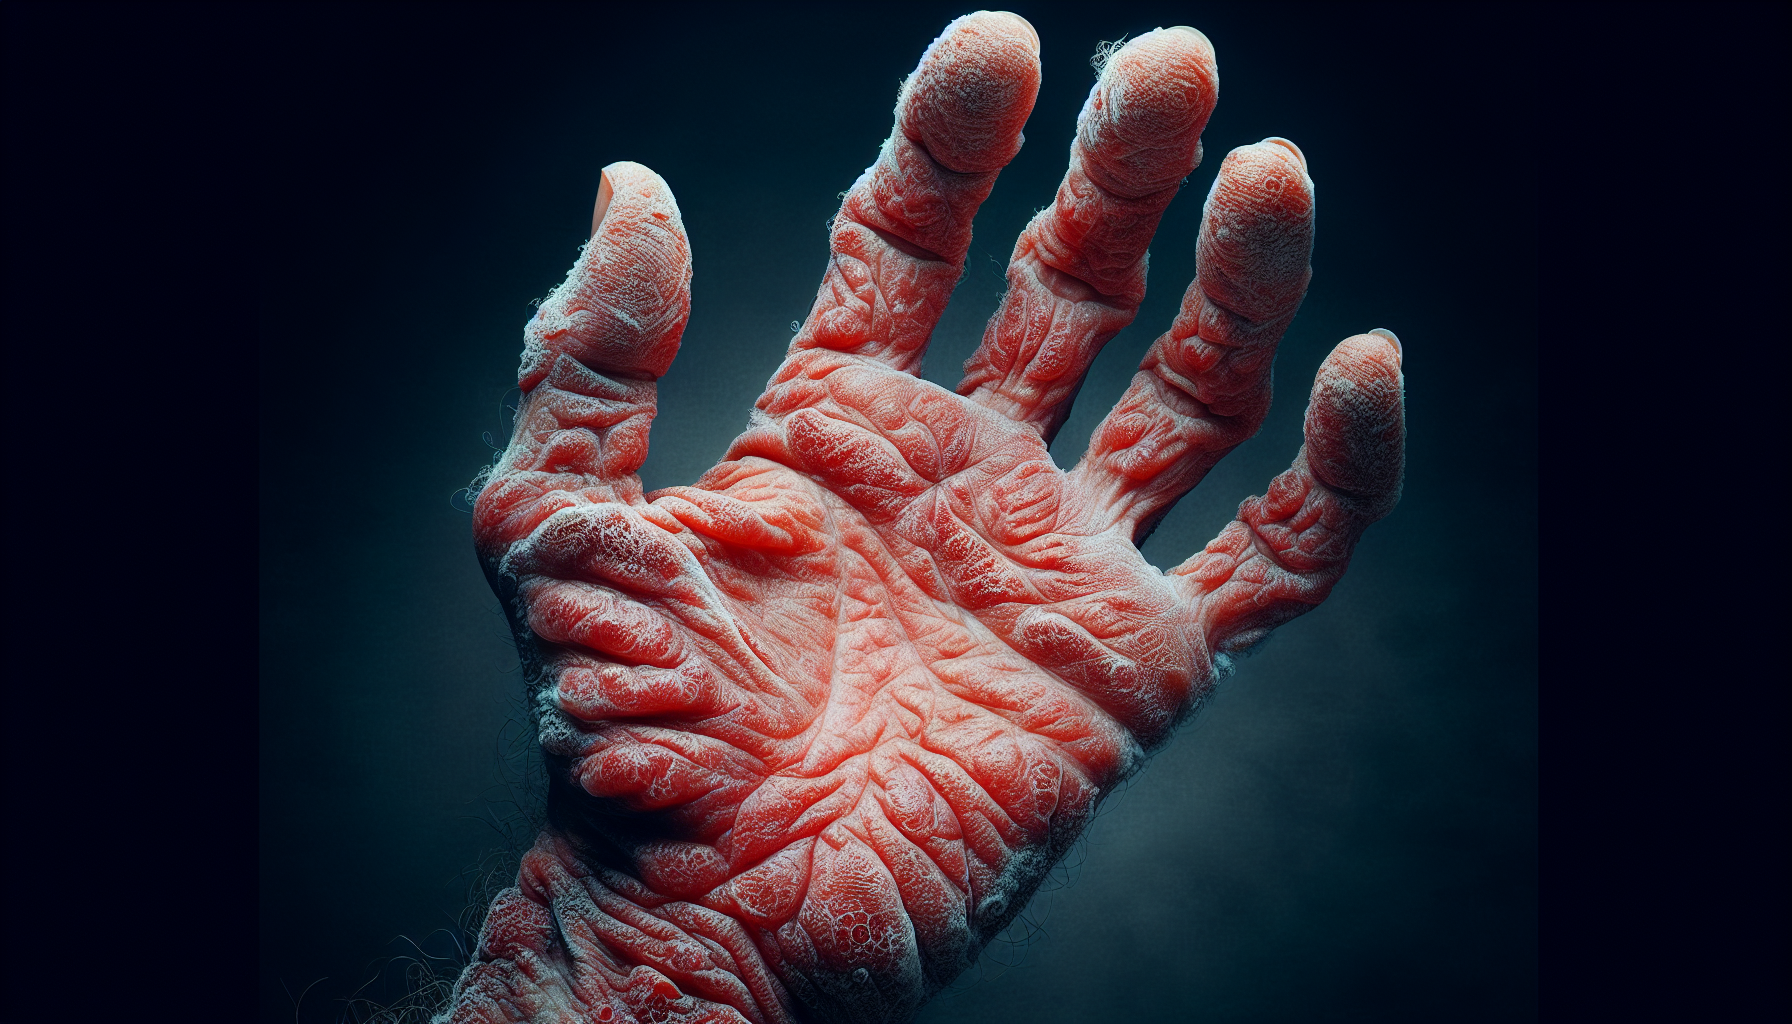 How Does Eczema Affect A Person’s Life?